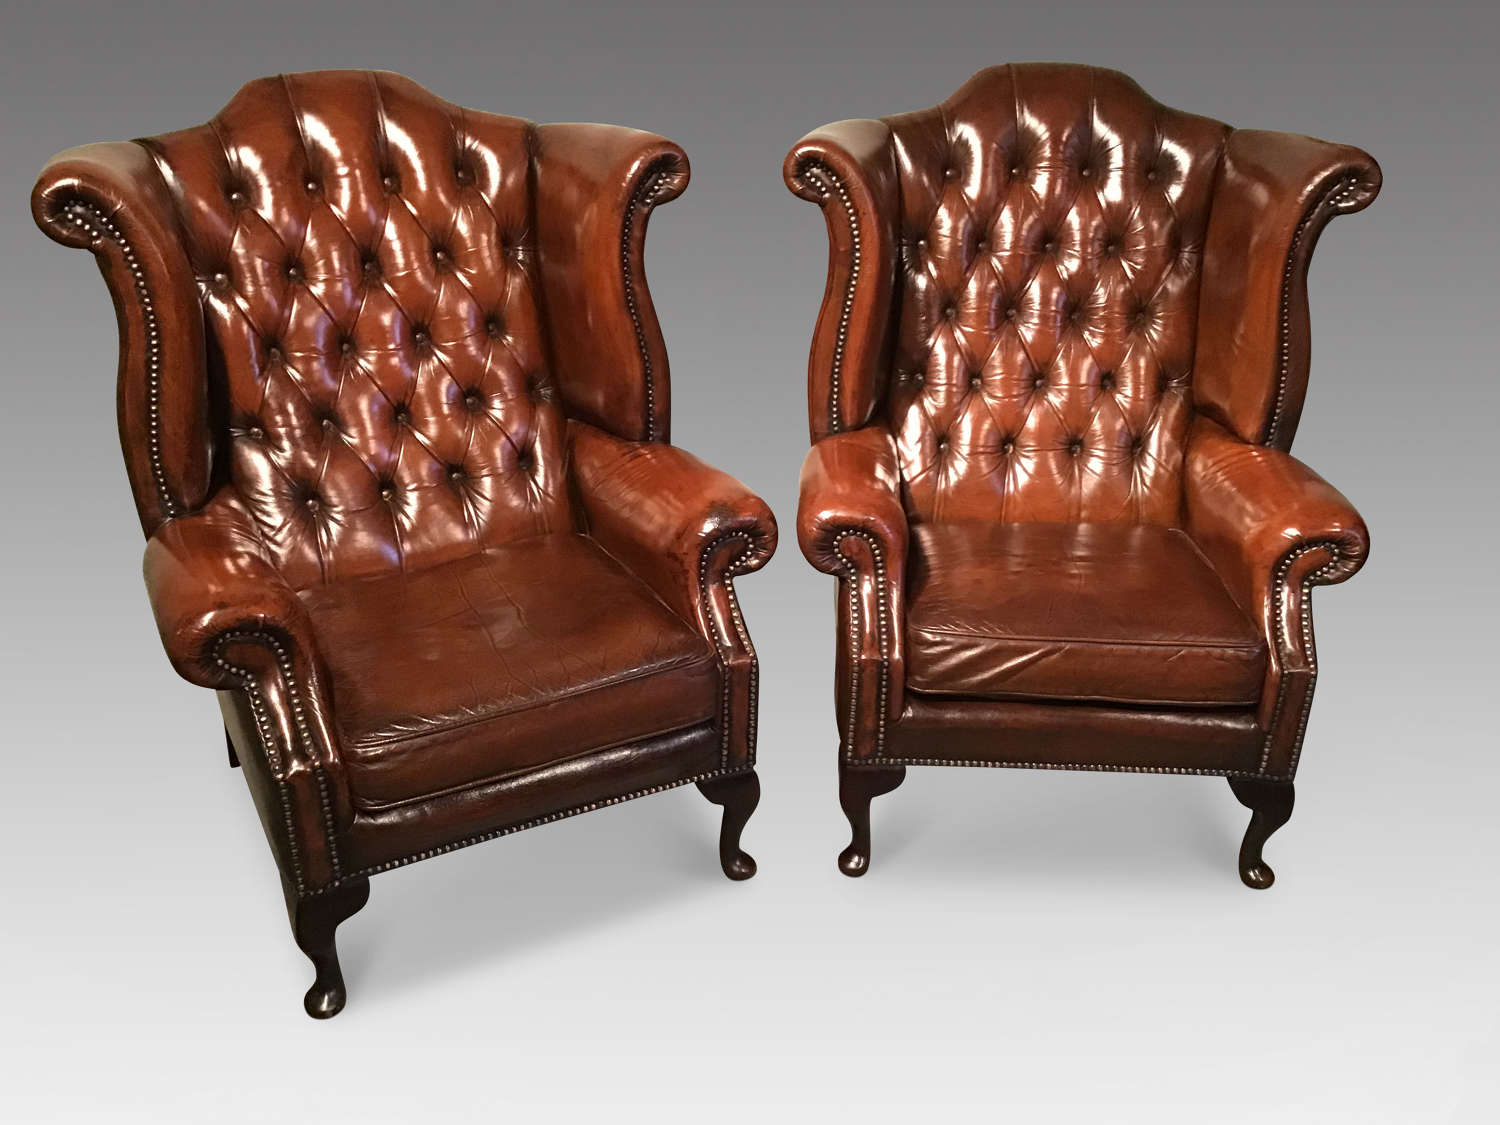 Pair of leather wing chairs